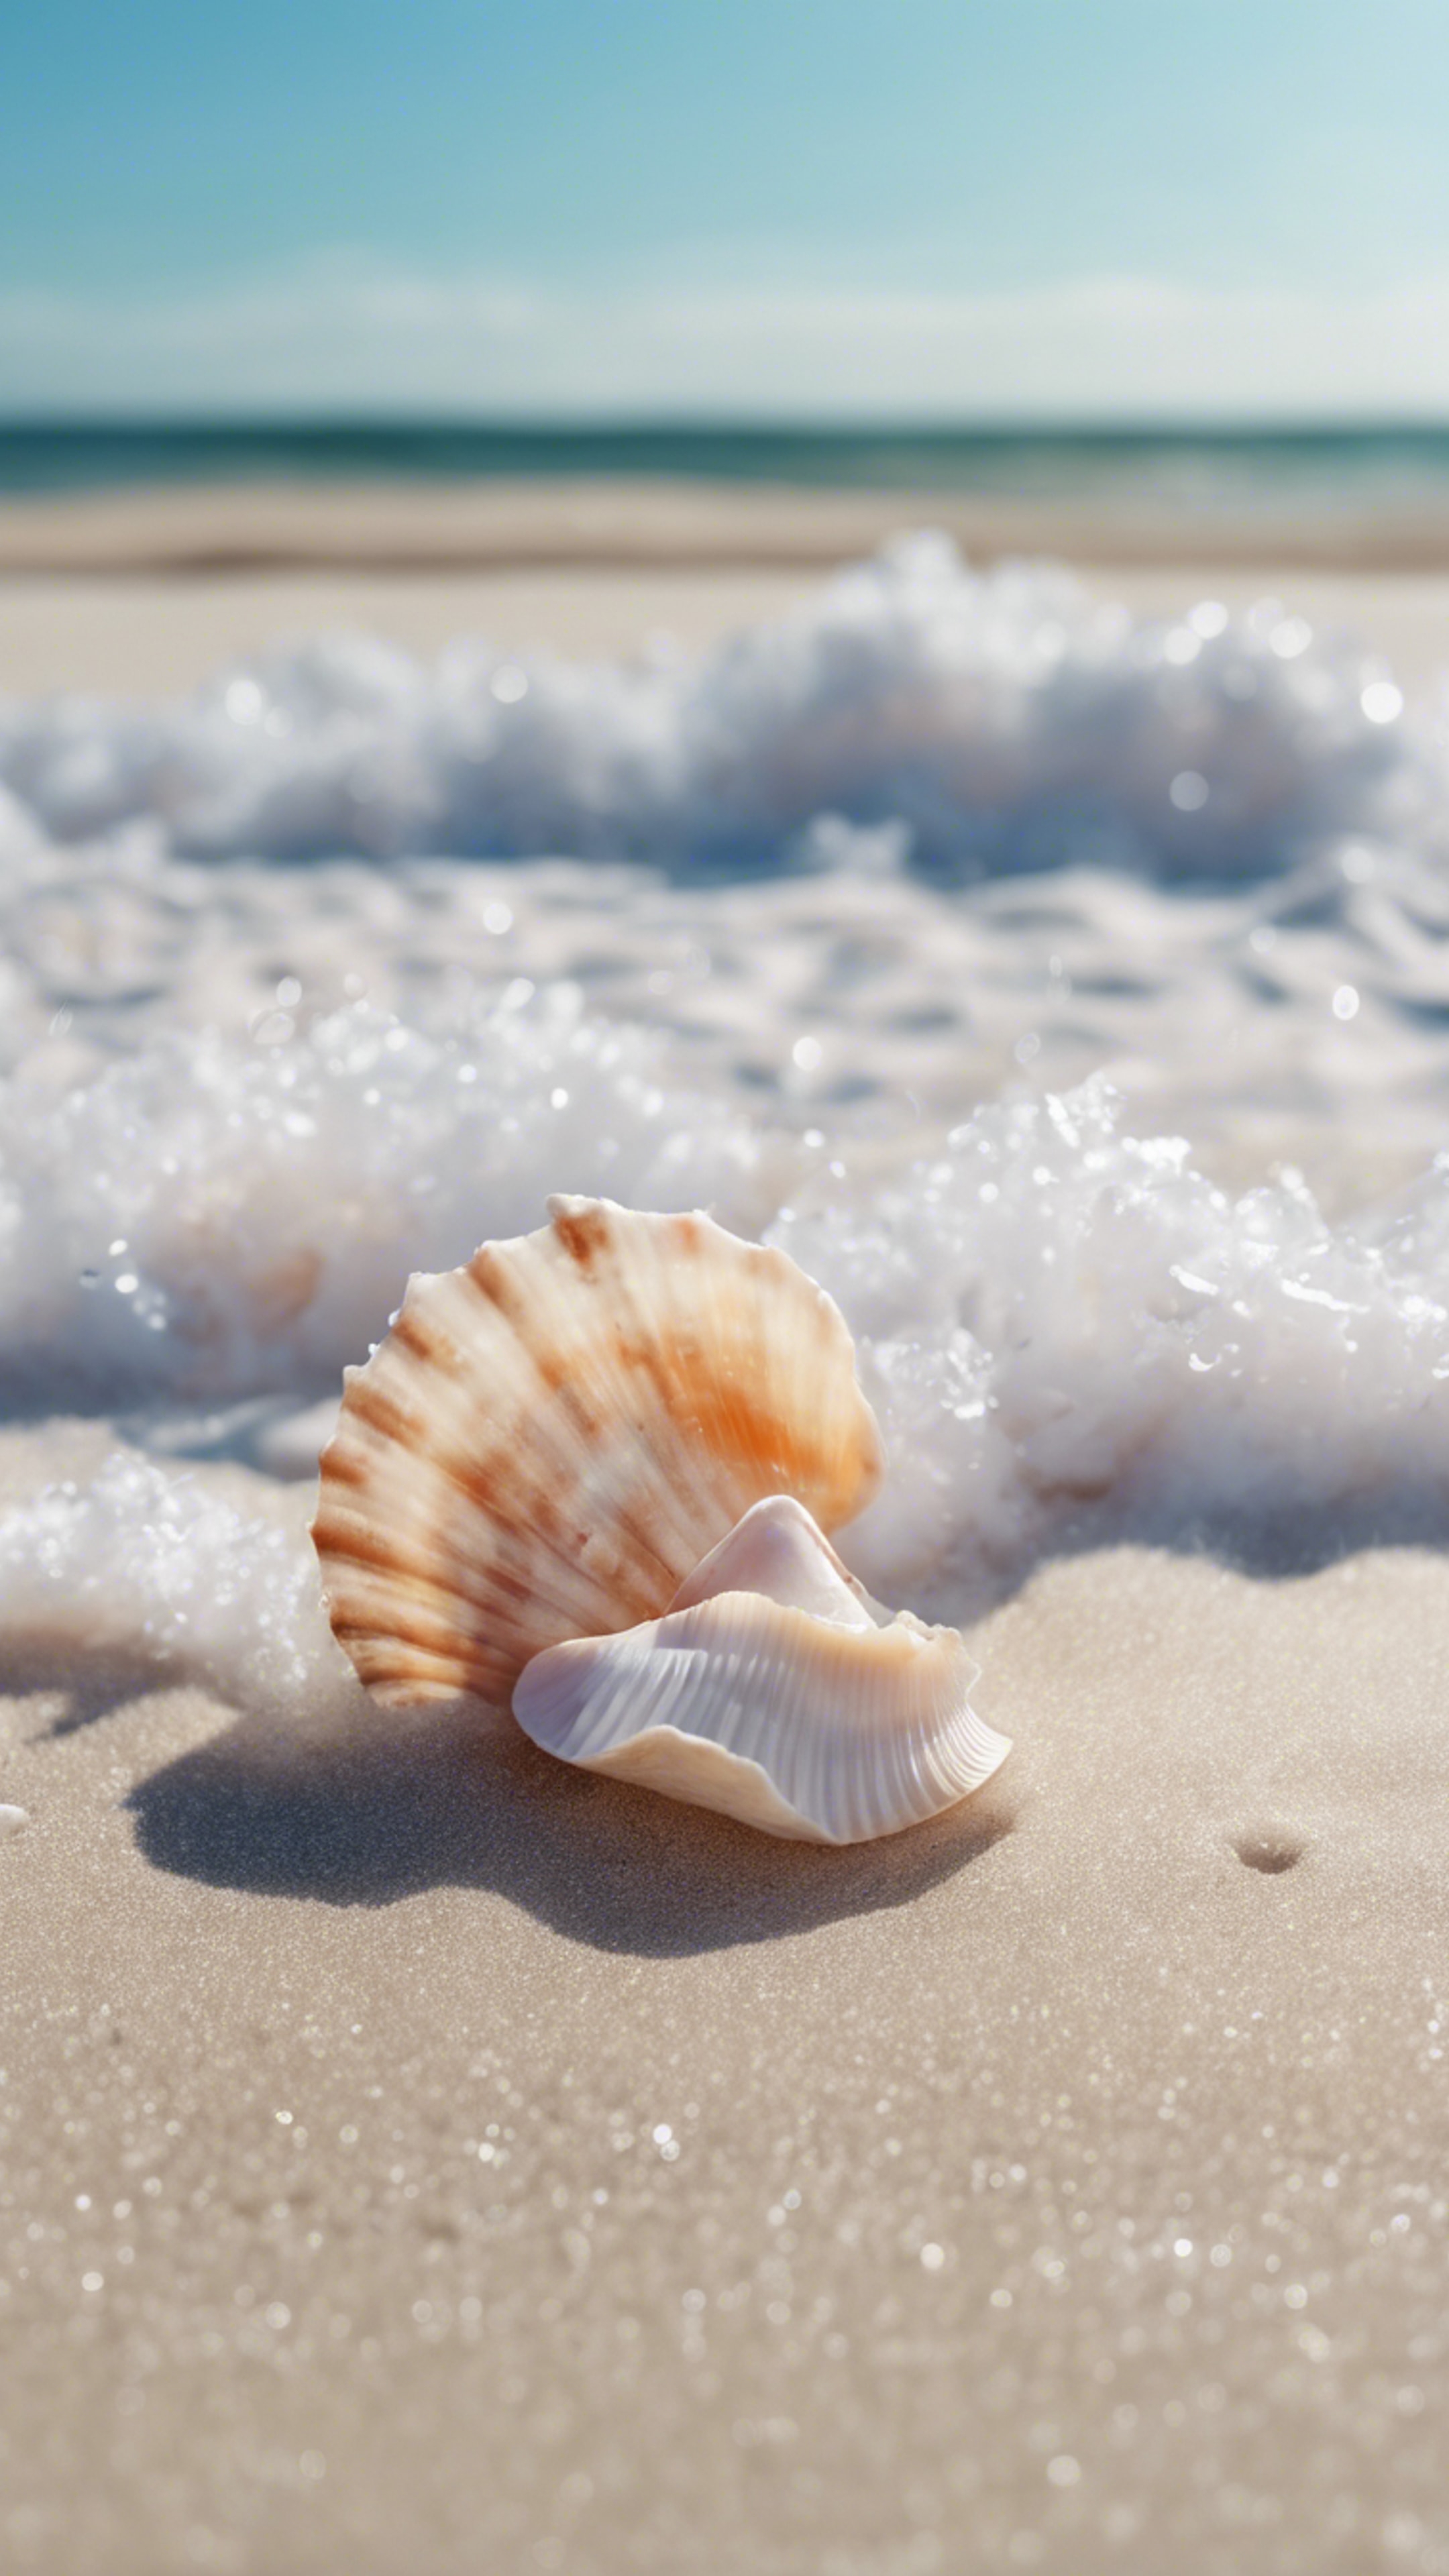 A wave washing ashore under a pastel blue sky, seashells scattered in white sand. 벽지[00bc1dd8280e4c80977e]